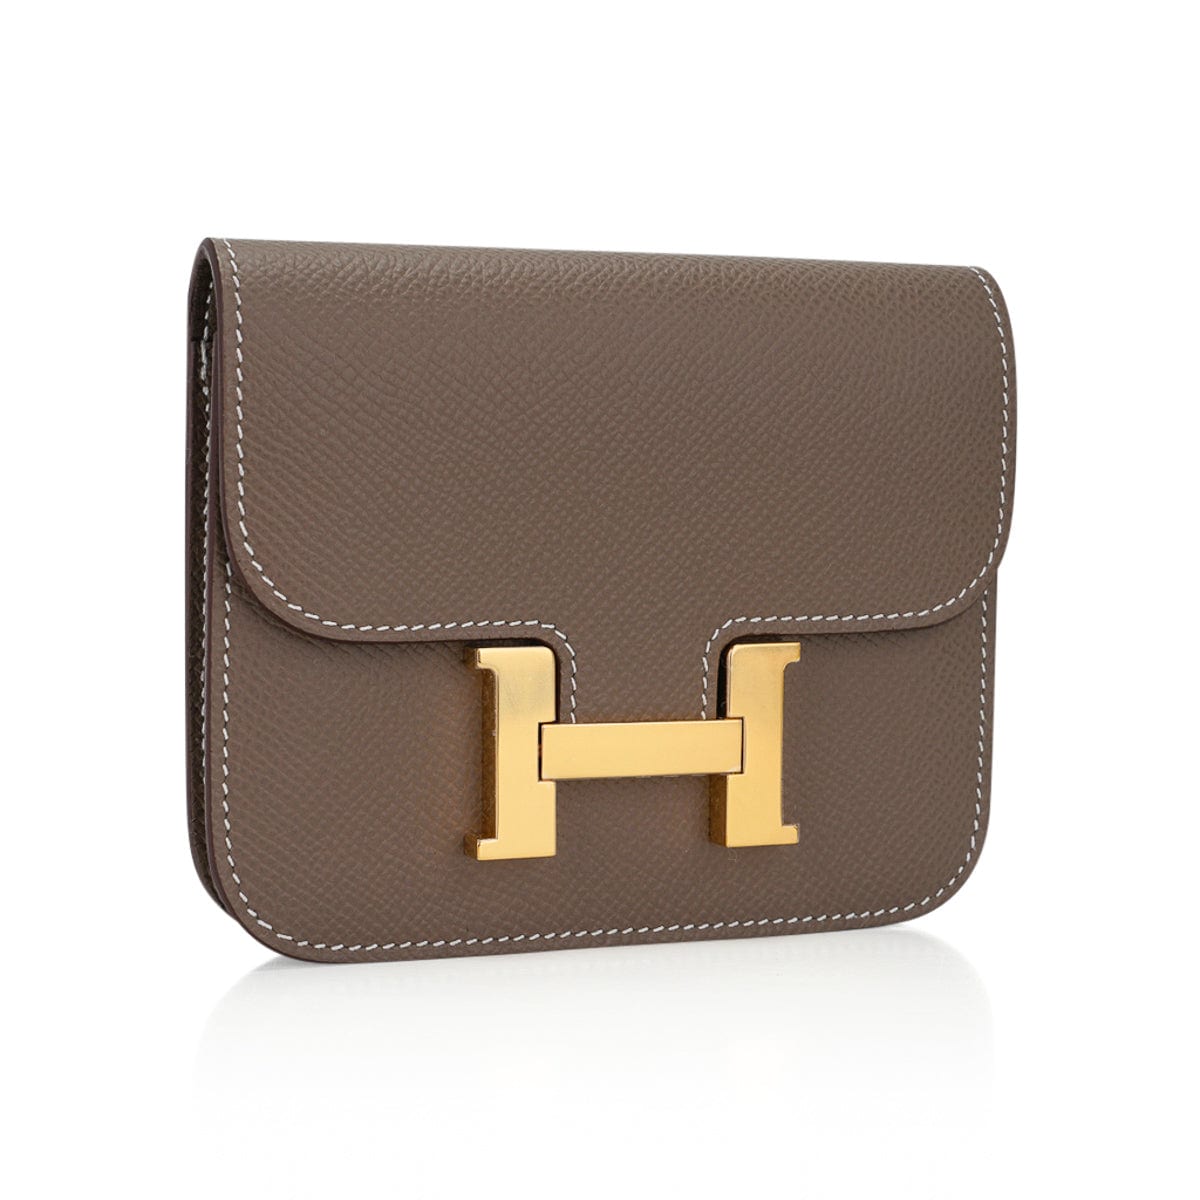 Hermes Constance Compact Wallet Epsom Leather Gold Hardware In Brown